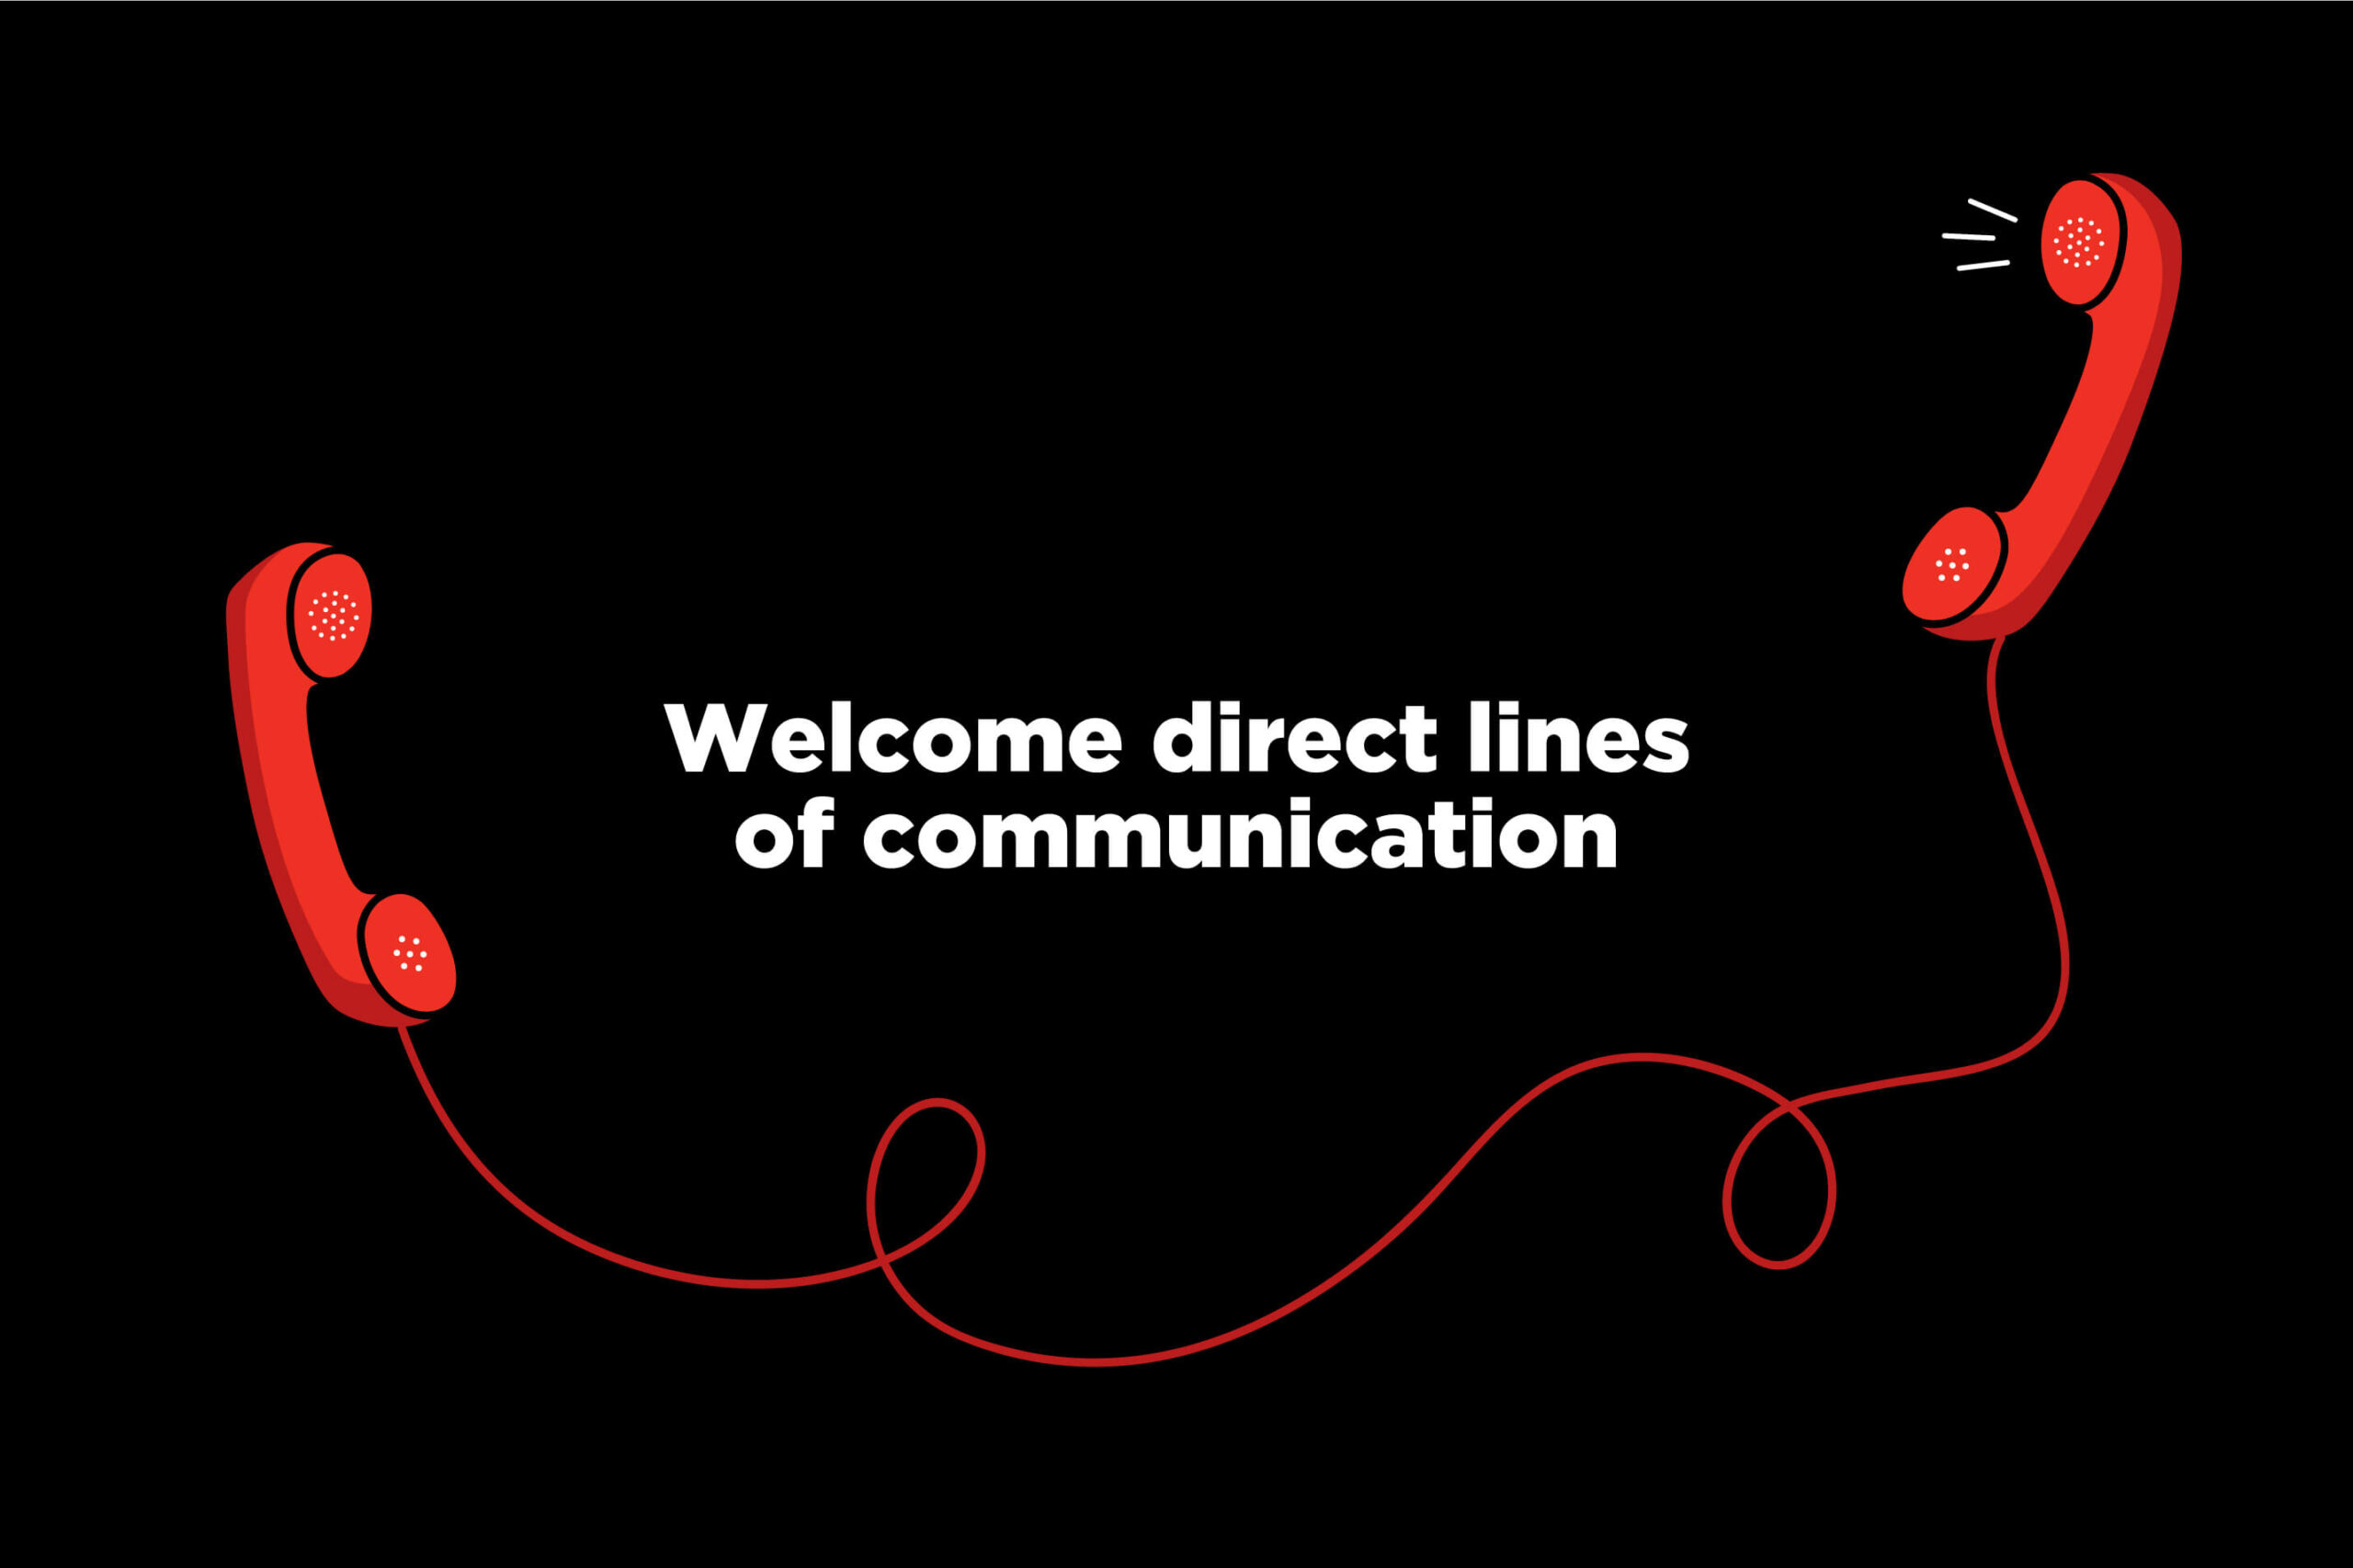 Welcome direct lines of communication